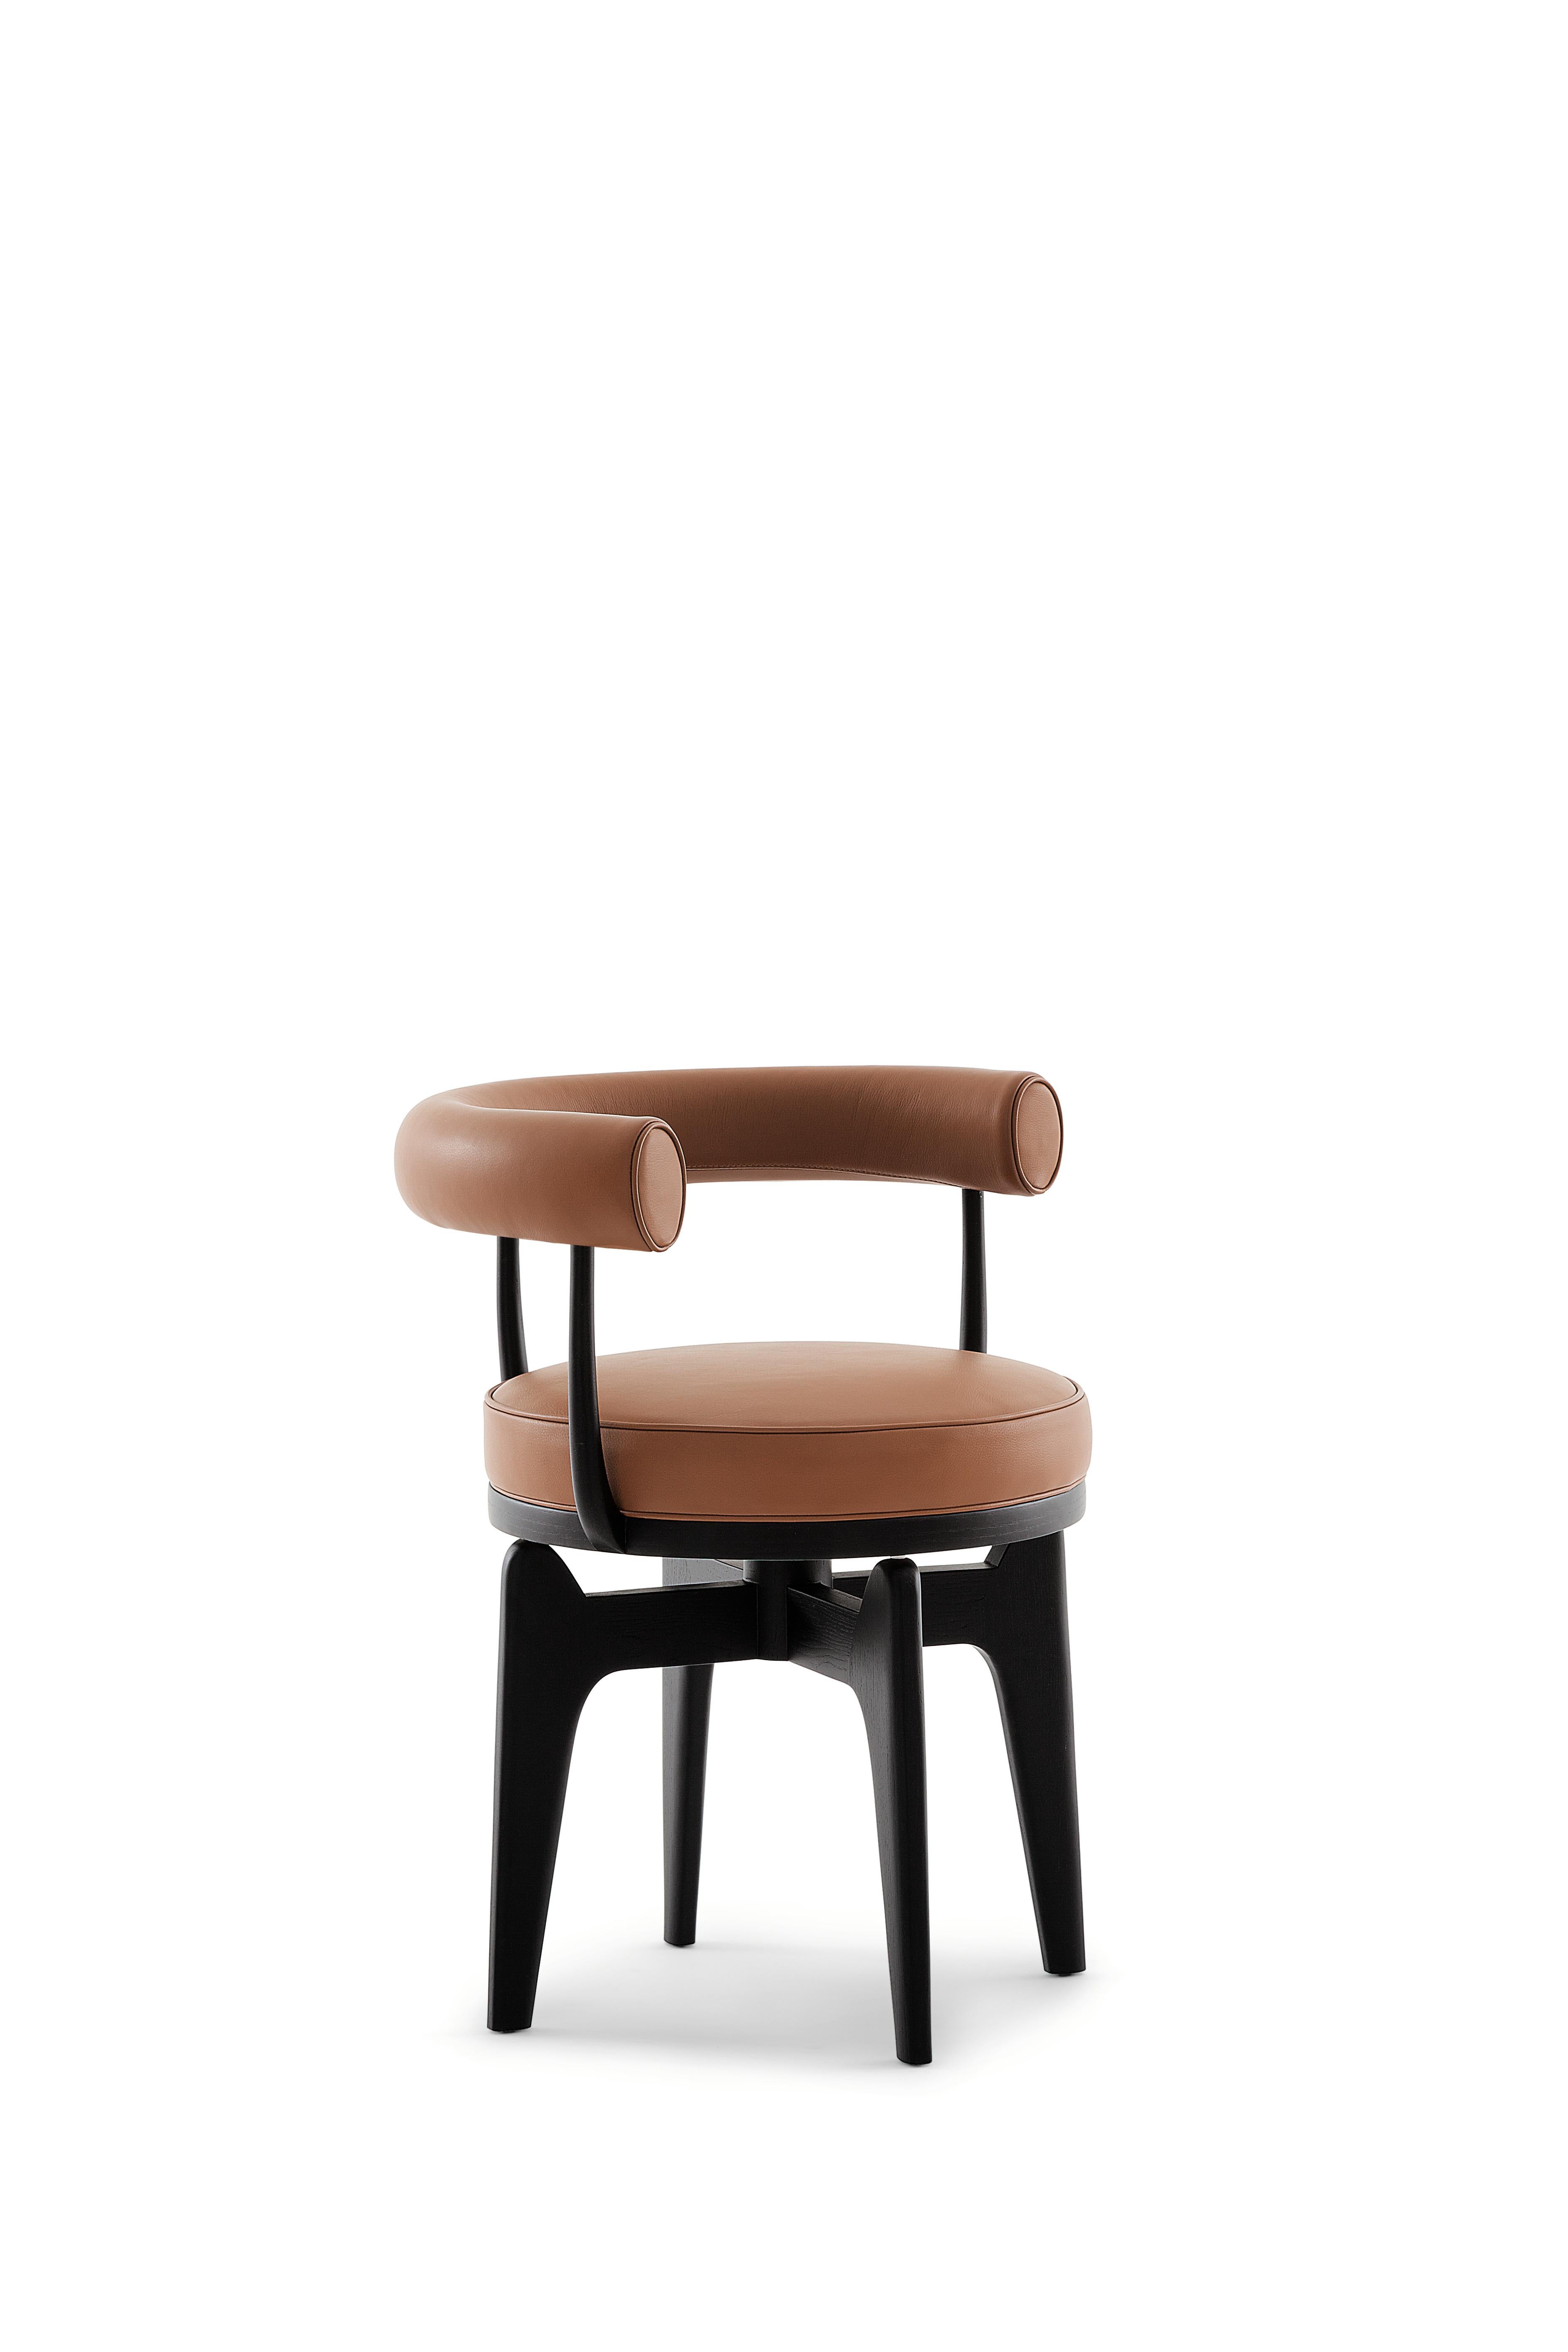 Mid-Century Modern Fauteuil indochine Charlotte Perriand  en vente